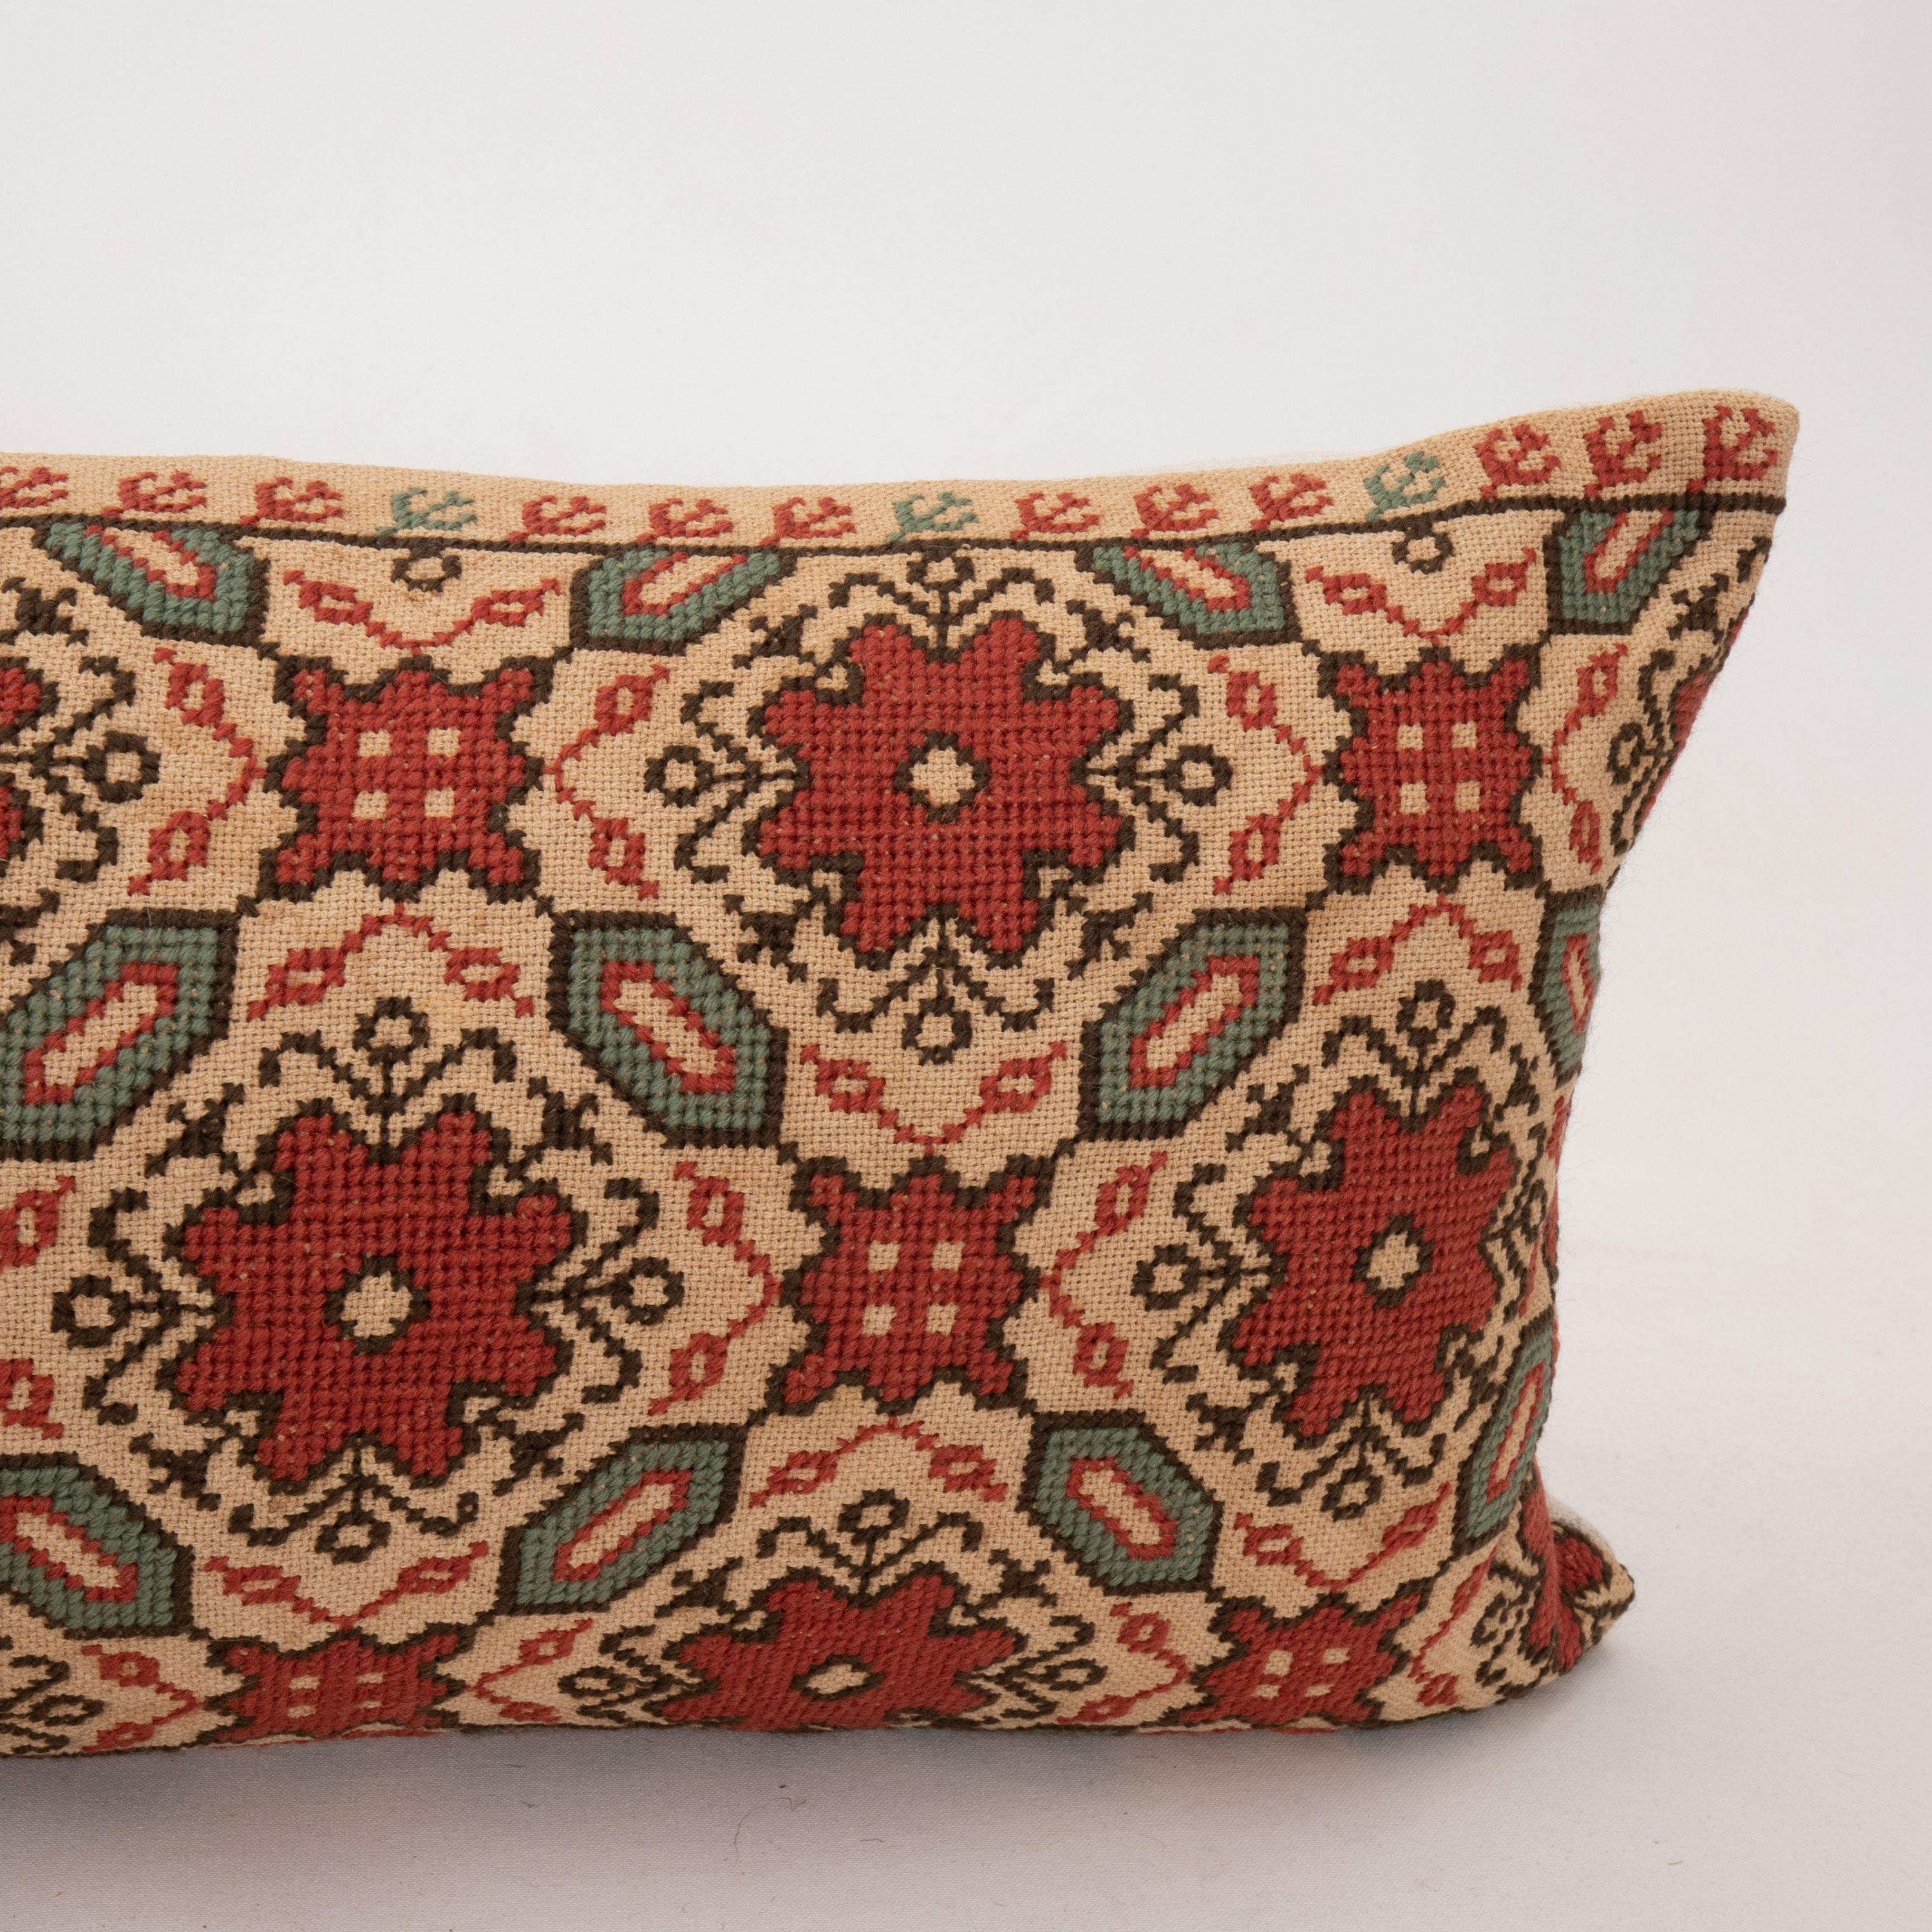 XXL Lumbar Pillow Case Made from an Eastern European Embroidery, 1900s In Good Condition For Sale In Istanbul, TR